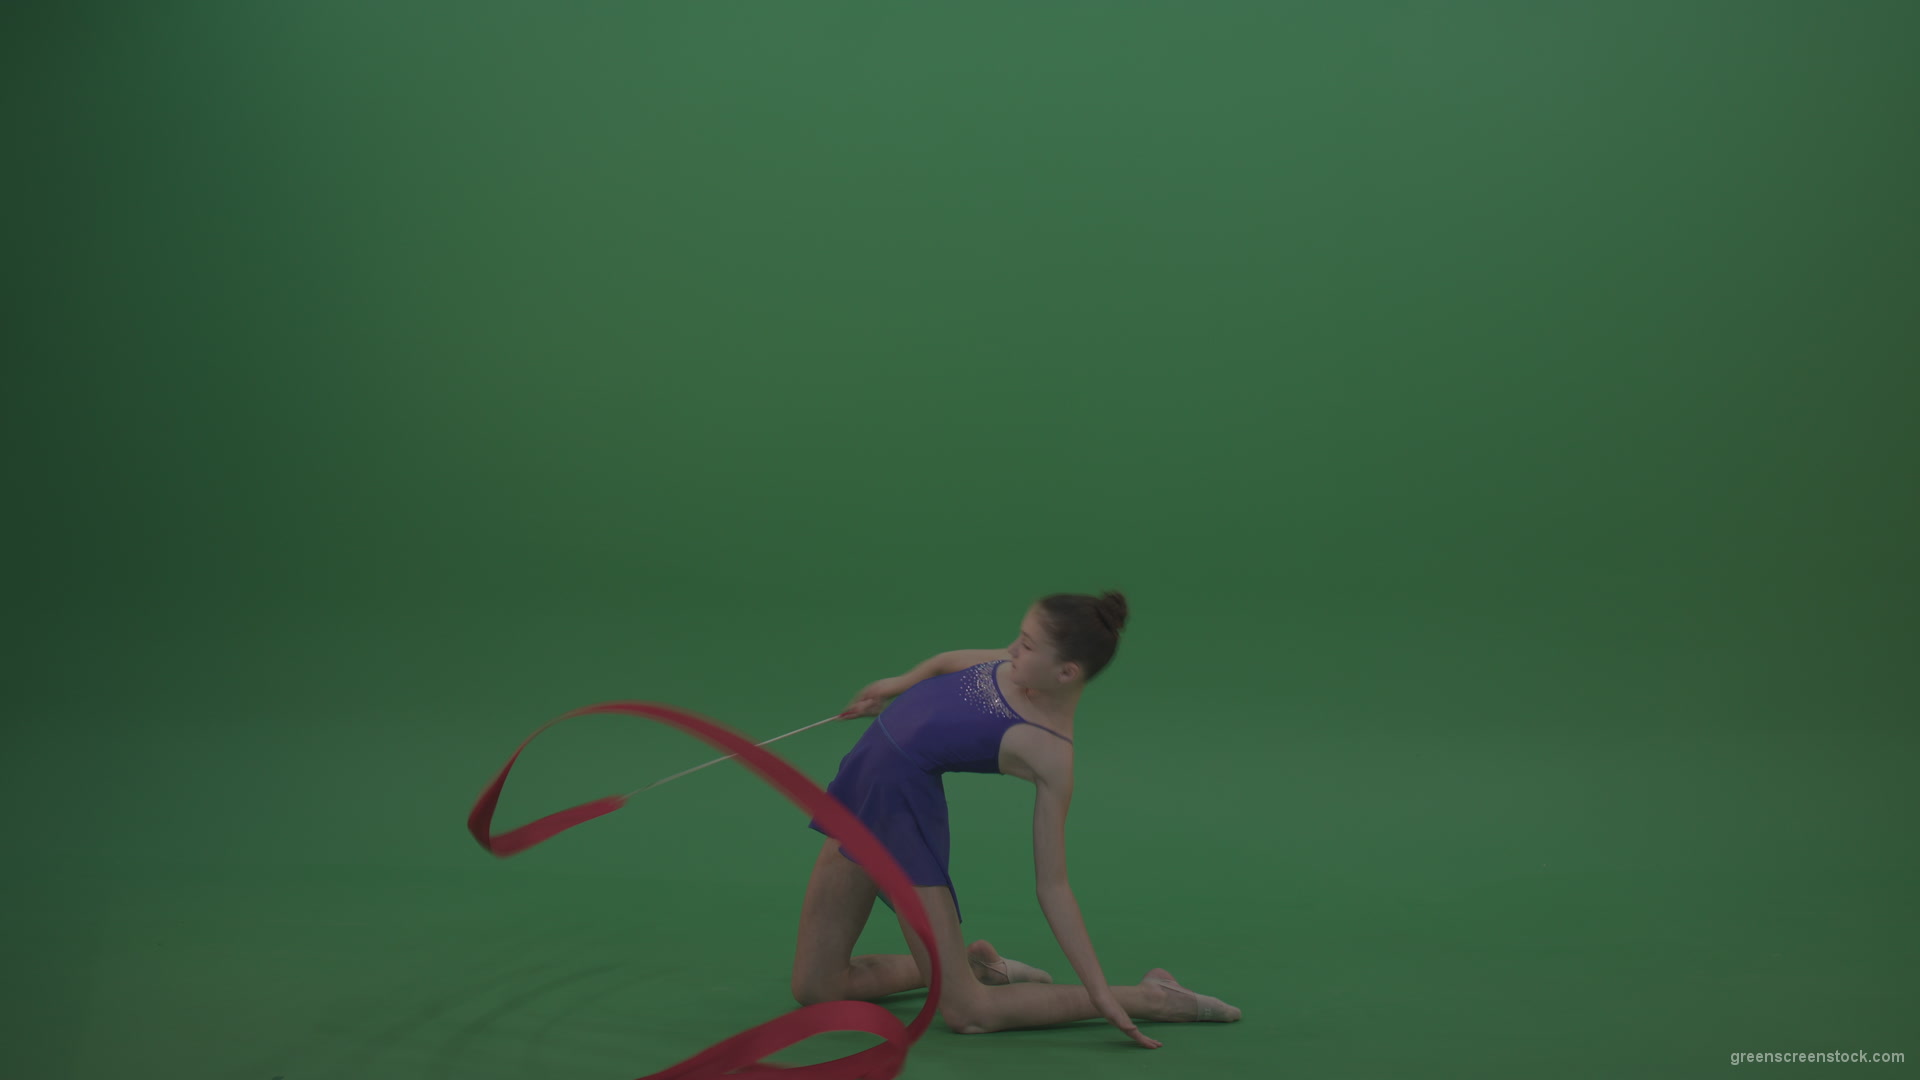 Young_Brunette_Gymnast_Wearing_Blue_Sparkling_Costume_Performing_Some_Acro_Dance_Moves_And_Positions_Using_Ribbon_On_Green_Screen_Chroma_Key_Wall_Background_007 Green Screen Stock